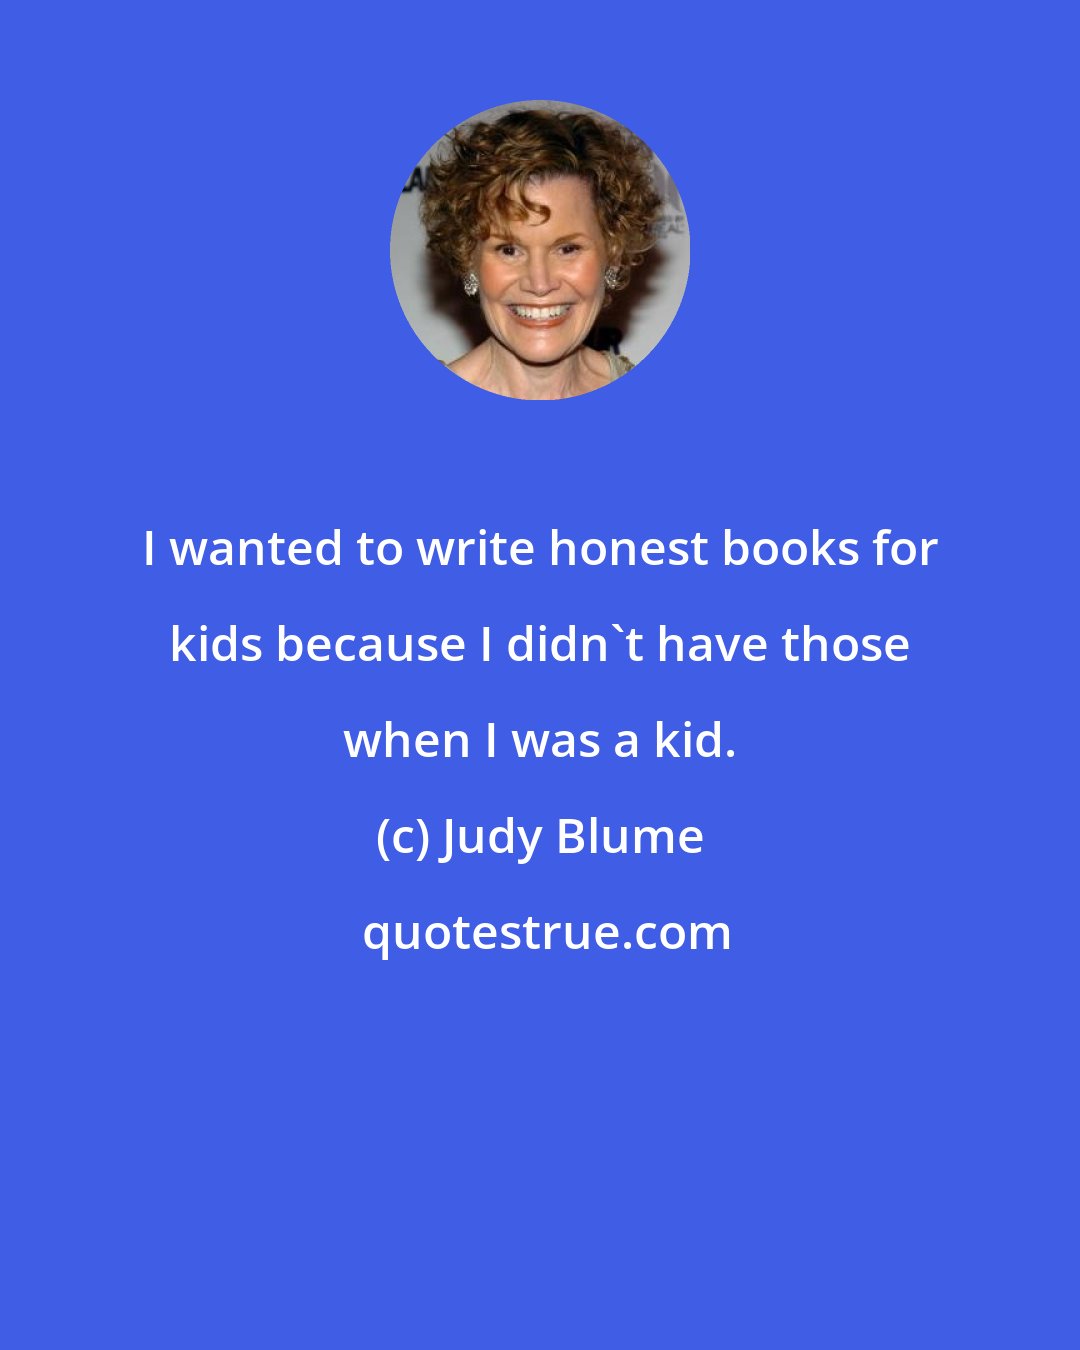 Judy Blume: I wanted to write honest books for kids because I didn't have those when I was a kid.